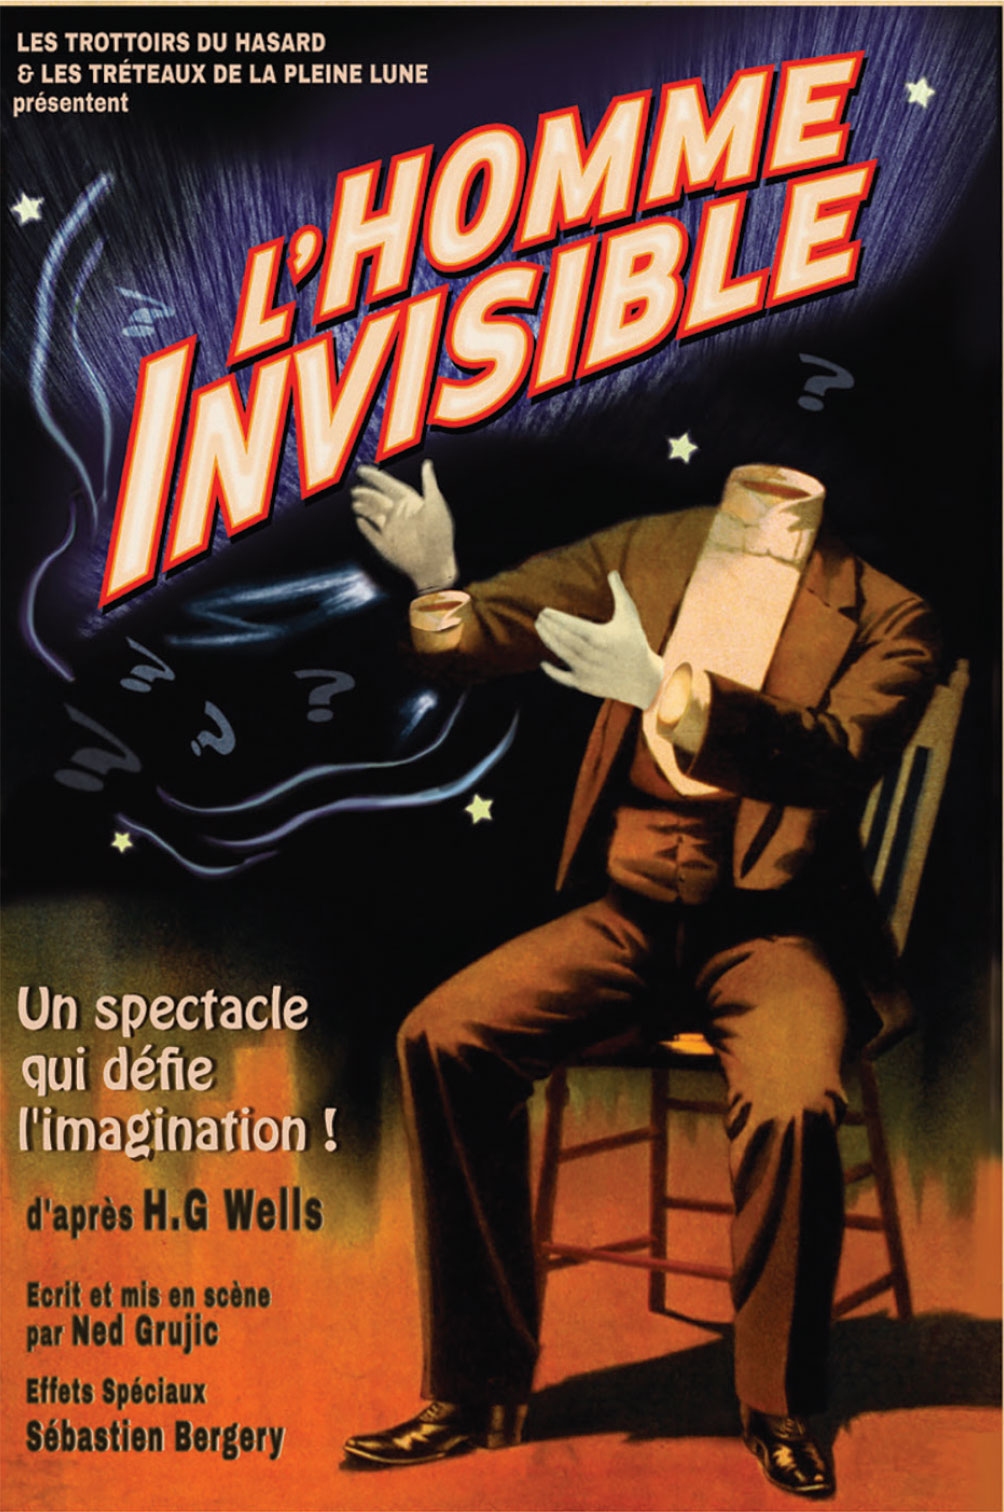 L’homme invisible